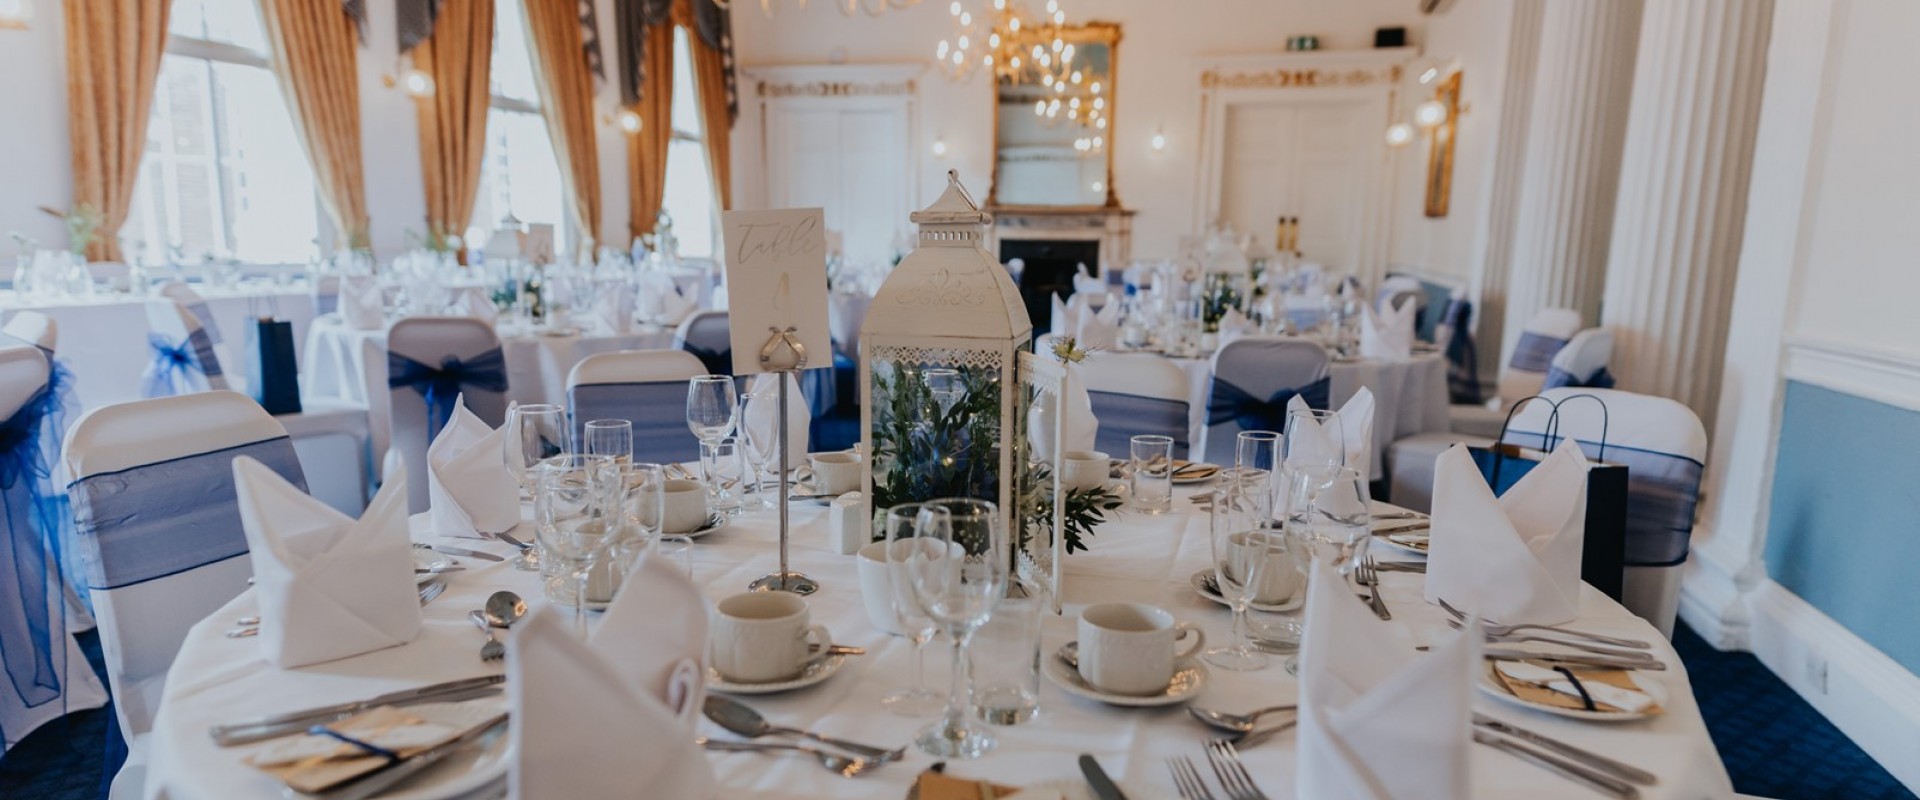 Weddings at The George Hotel in Lichfield Photo courtesy of James Merrick Photography 1